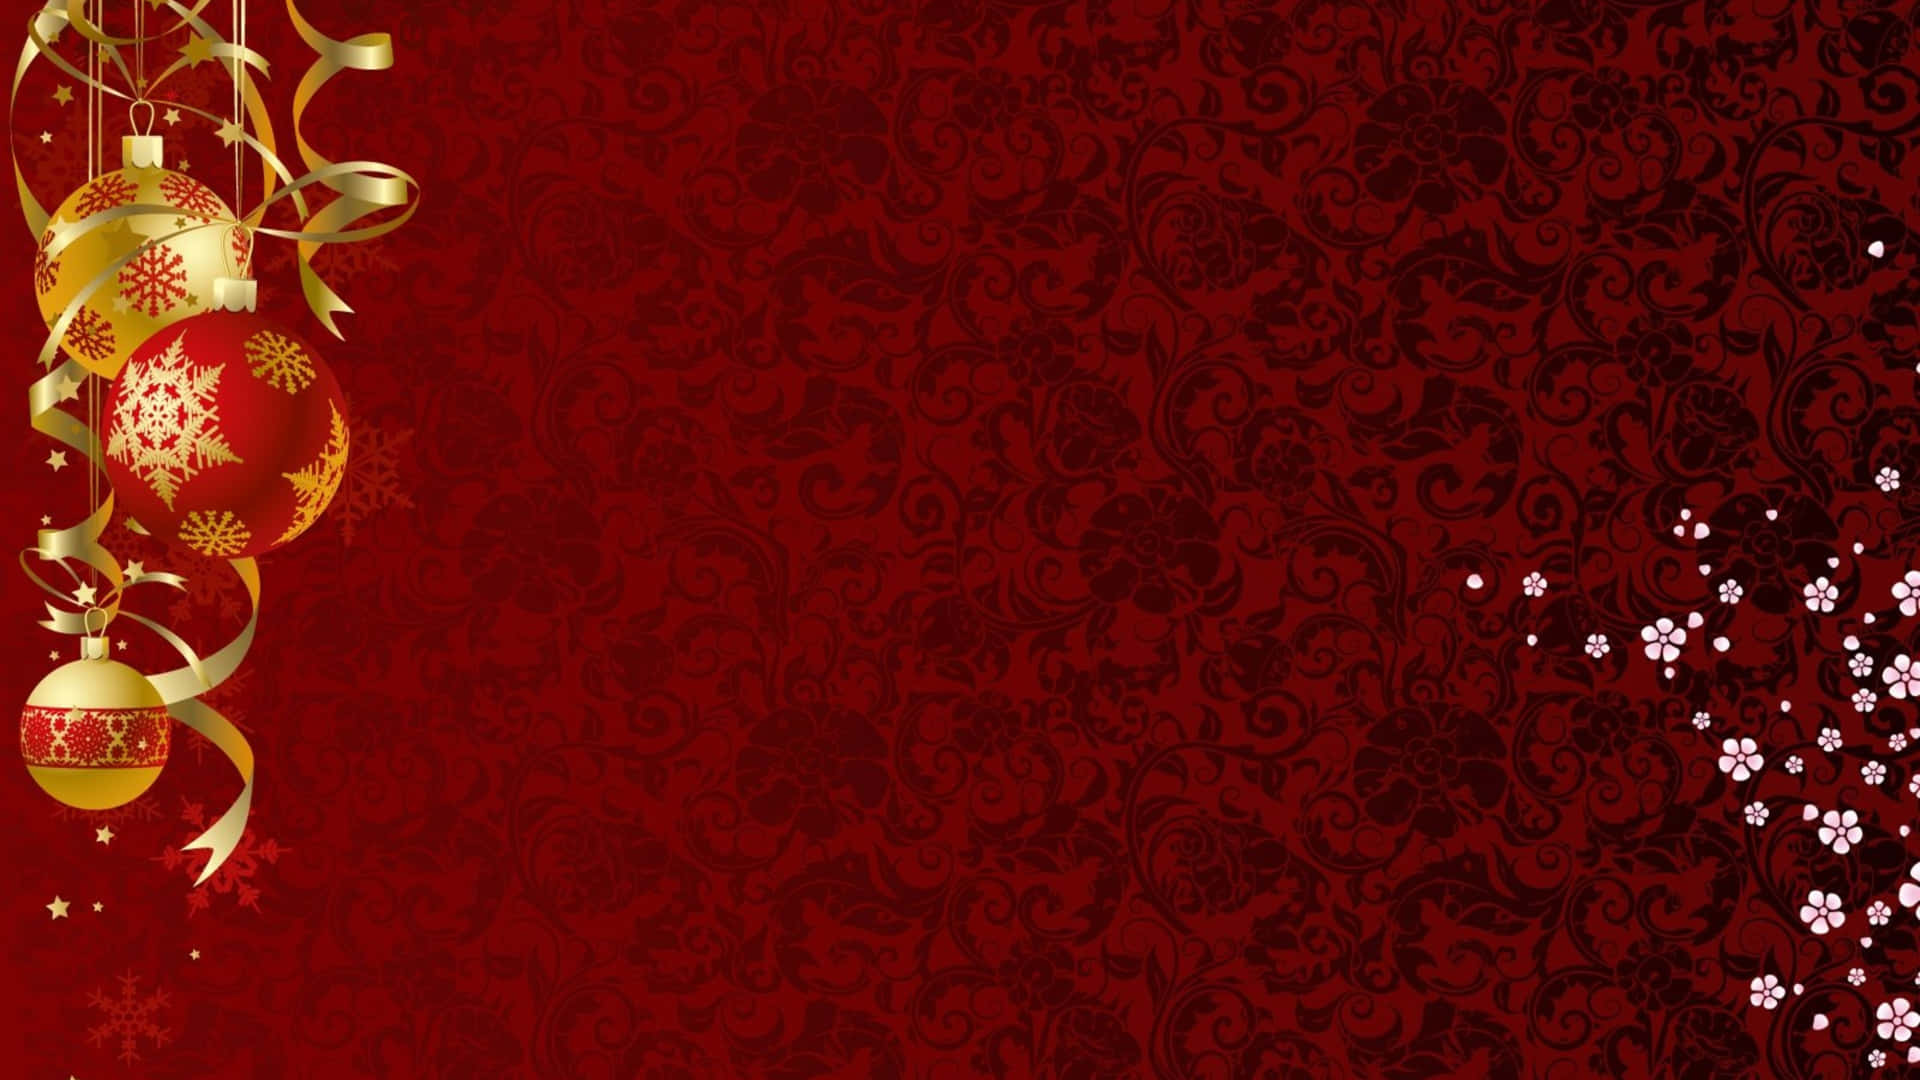 Celebrate Christmas in Style with this Fantastic Red Background